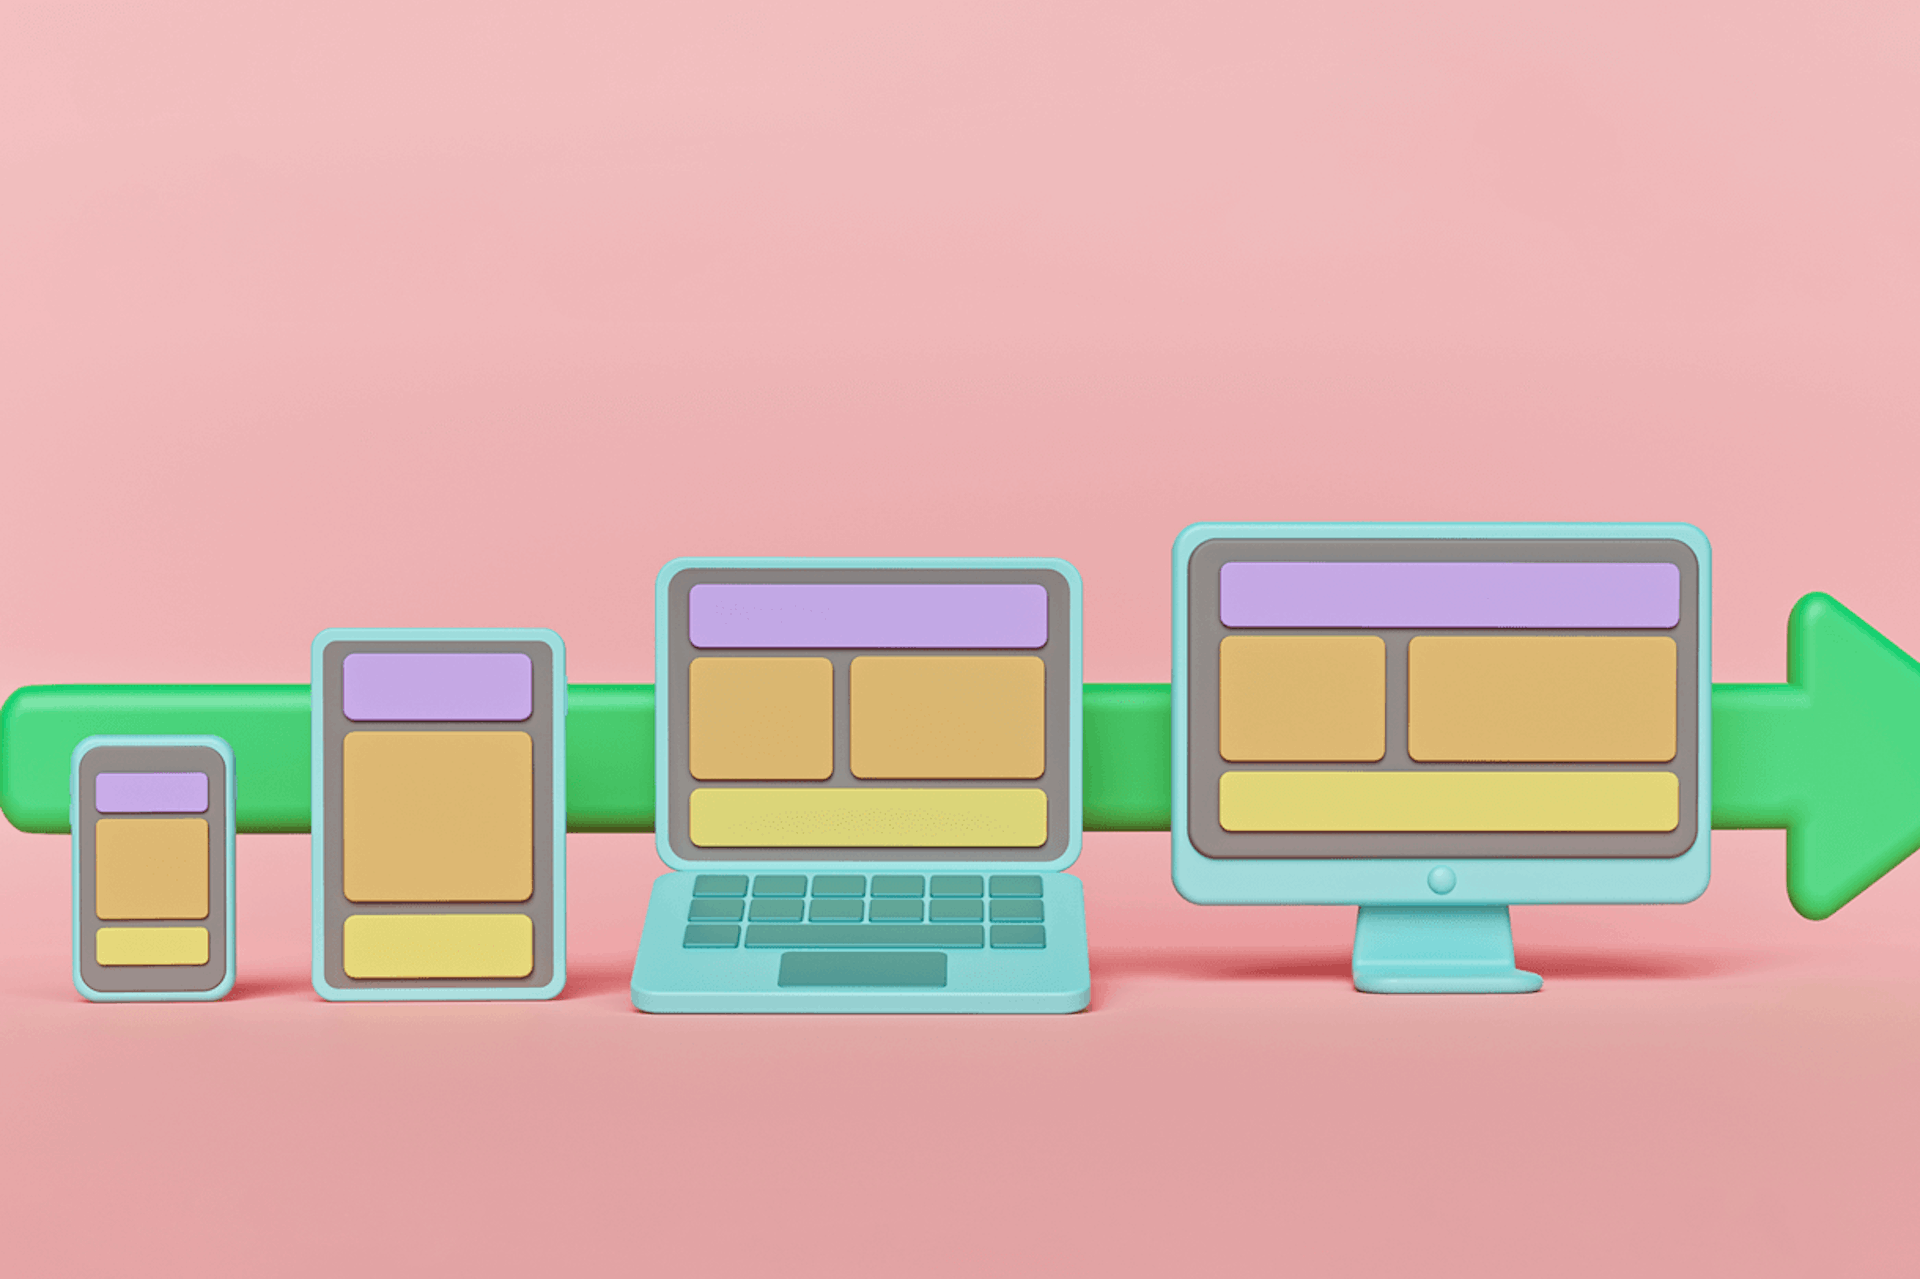 An illustration showing various device sizes by the same brand, such as an iphone, ipad, laptop, and desktop. Each device has the same color scheme showing on the screen. Blog post on product branding. 